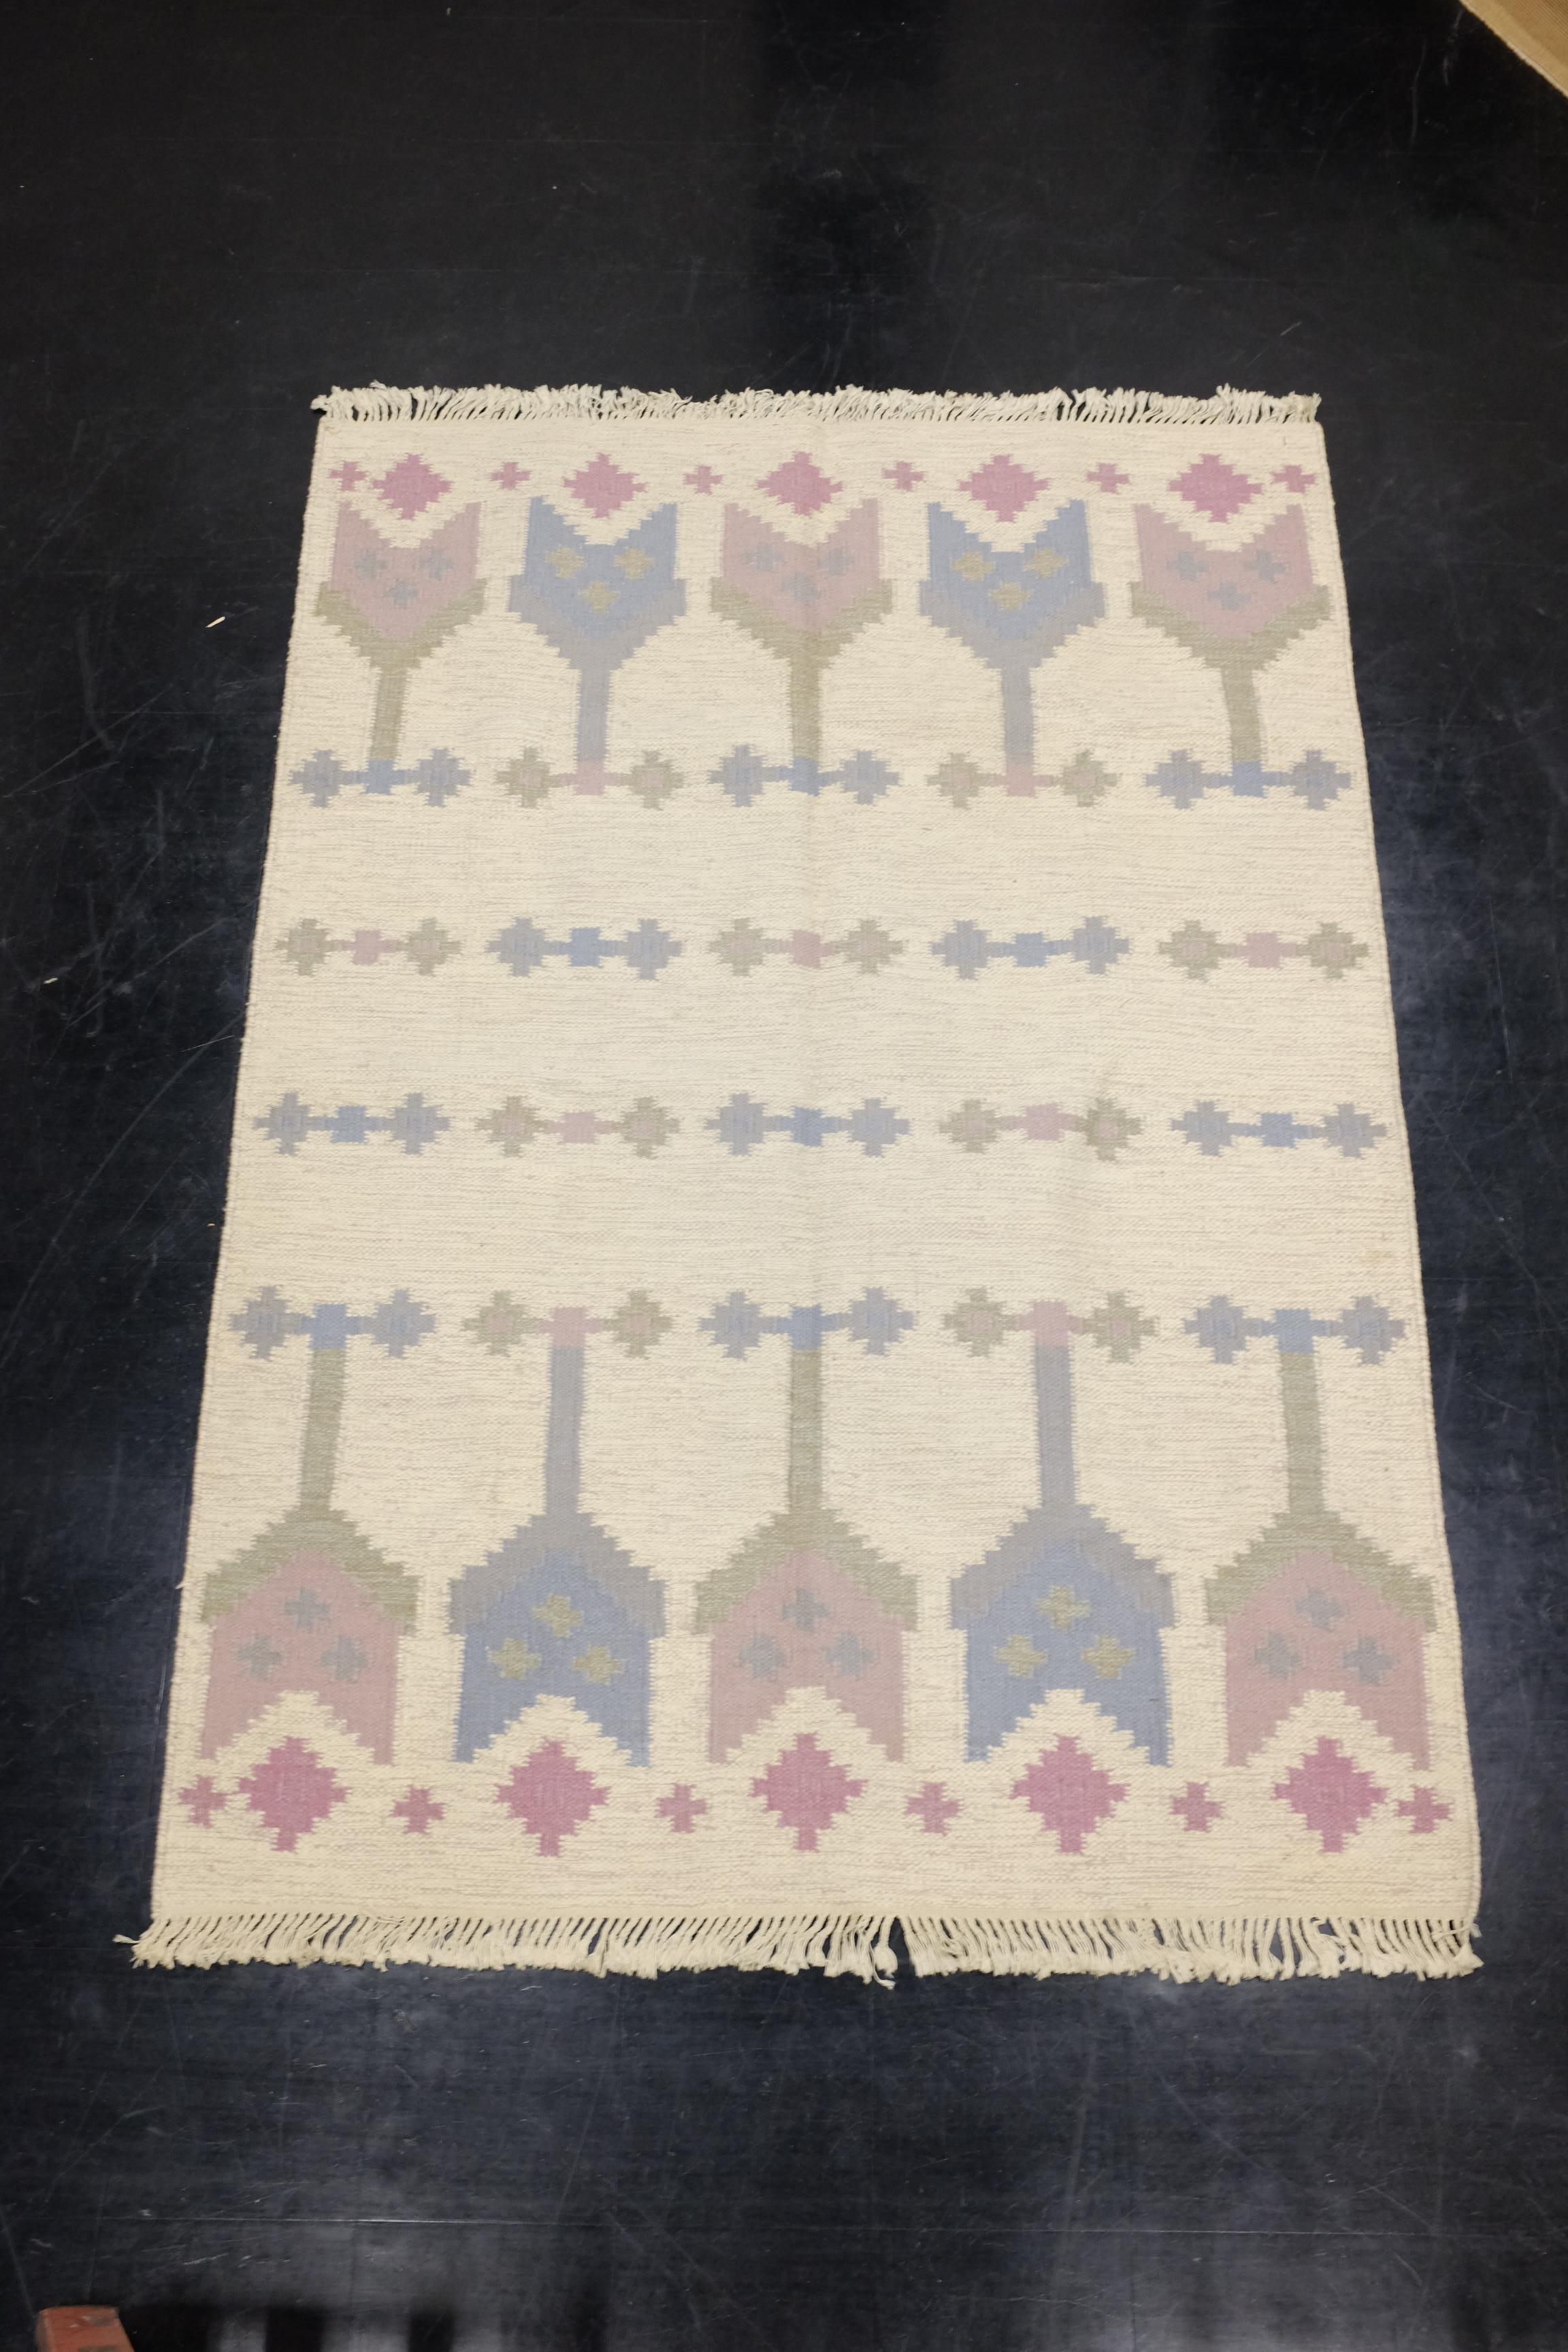 A very decorative midcentury flat-weave carpet made in Sweden during the 1950s. The carpet is made out of wool and in very good vintage condition.